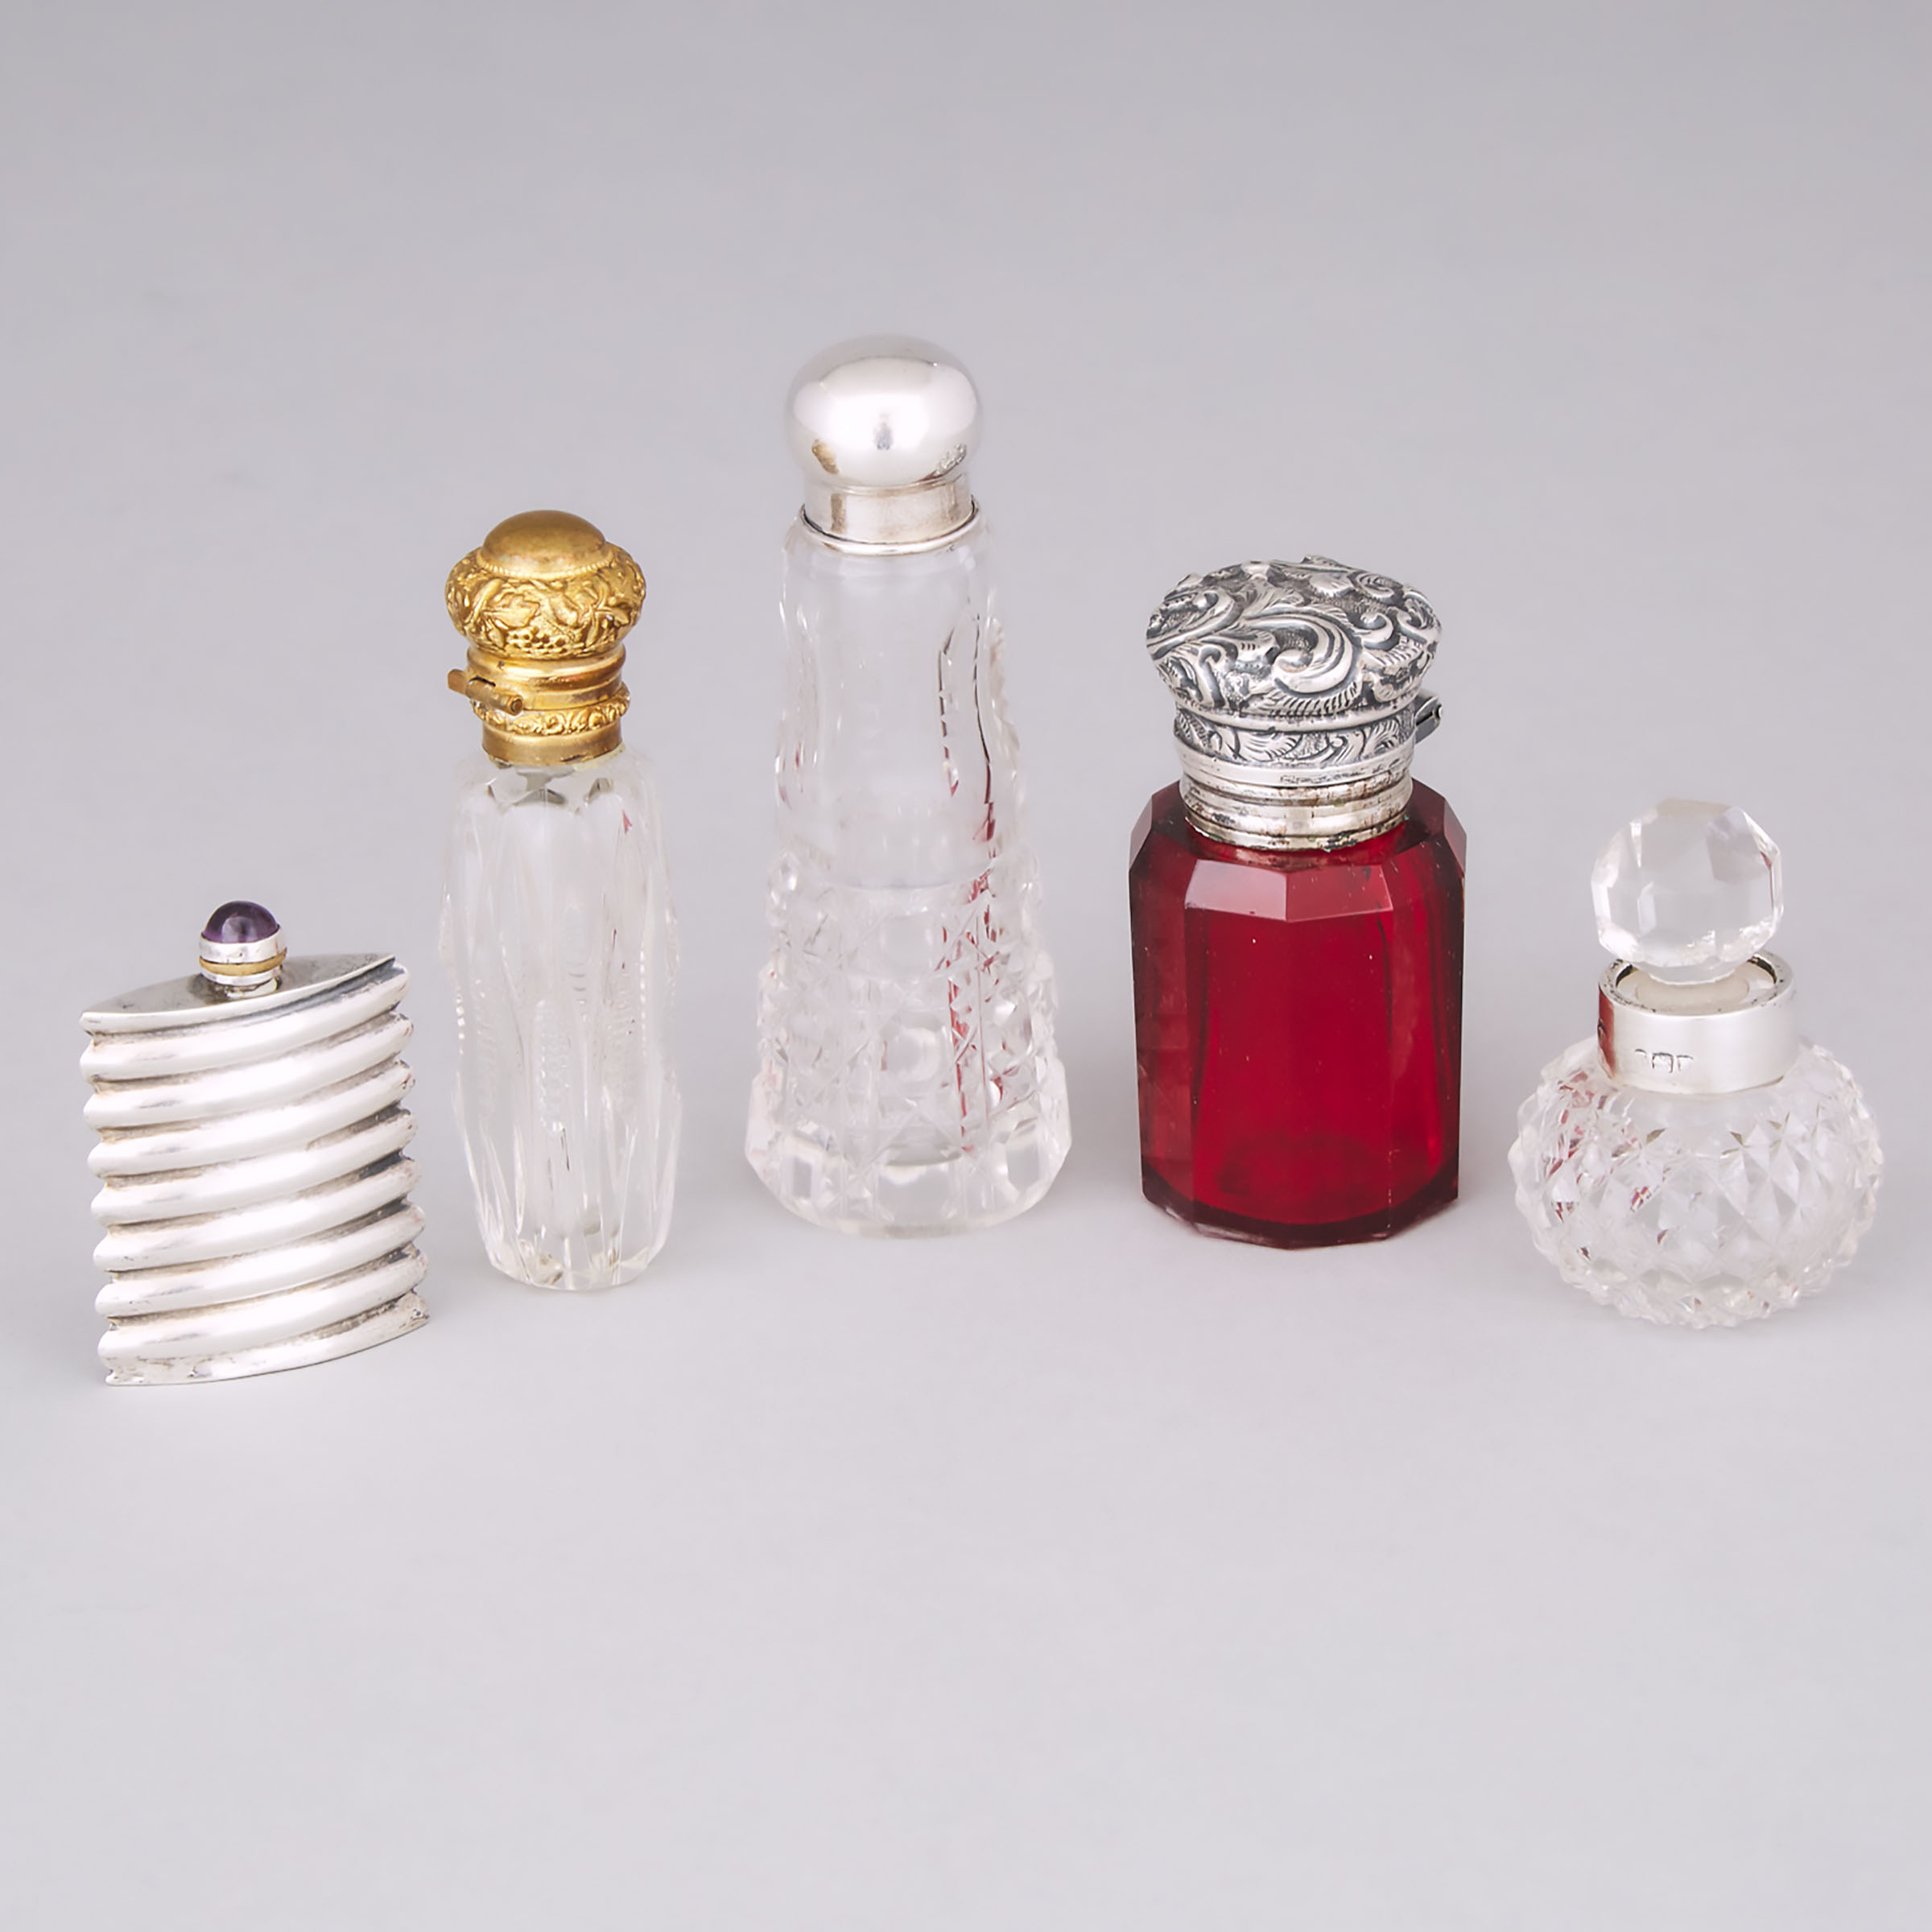 Five Silver and Metal Mounted Cut Glass Perfume Bottles, late 19th/early 20th century